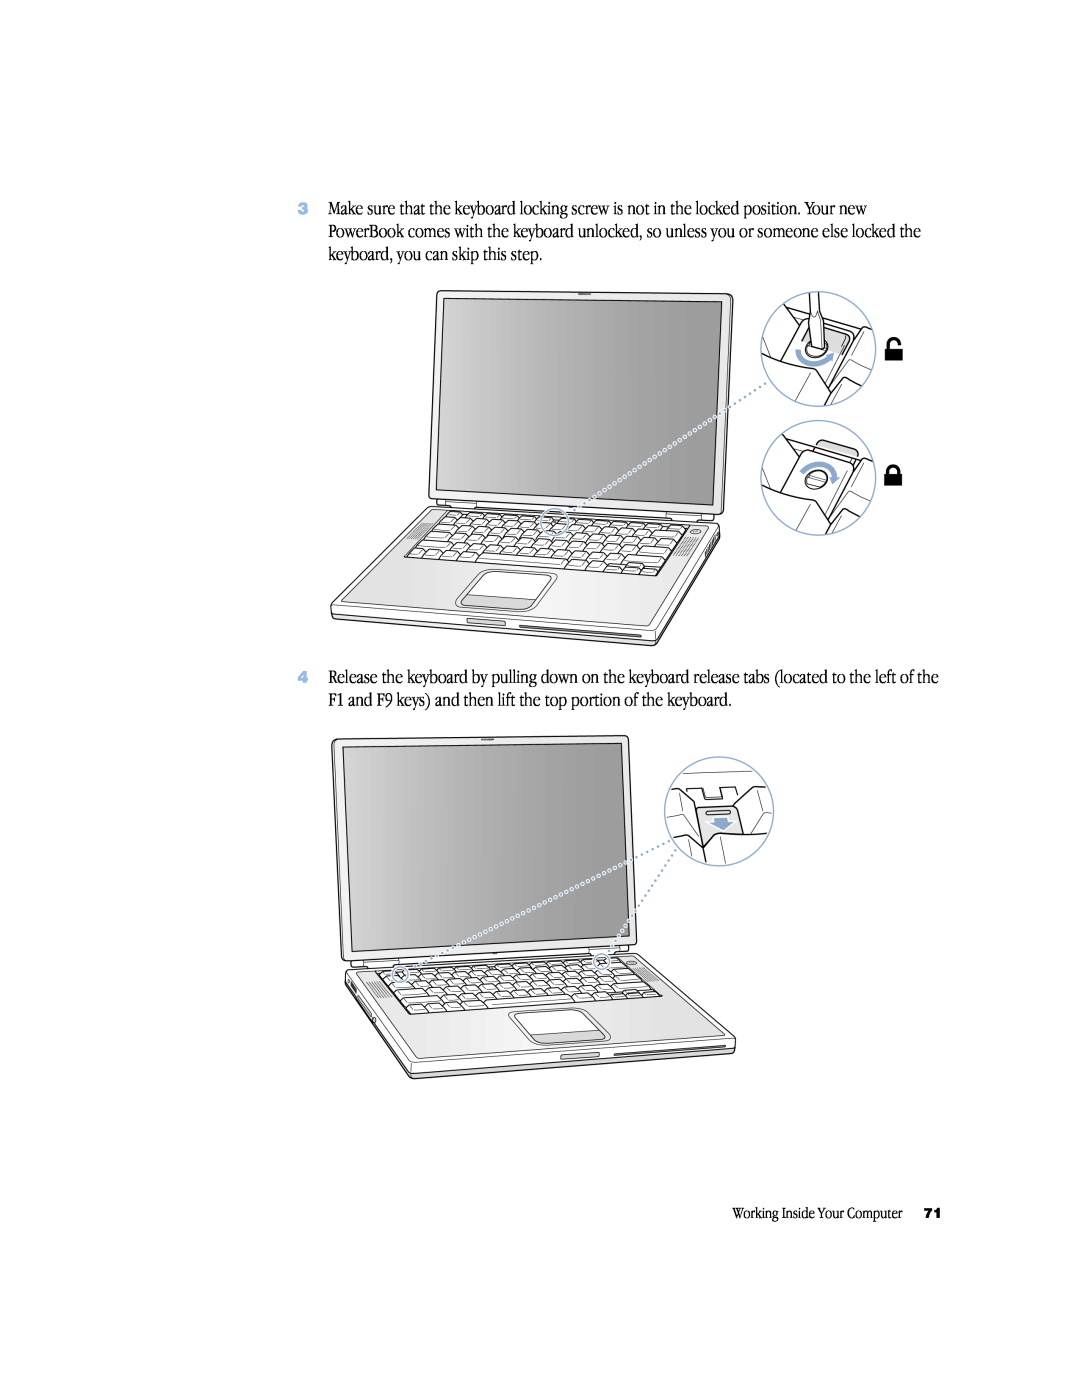 Apple powerbook g4 manual Working Inside Your Computer 